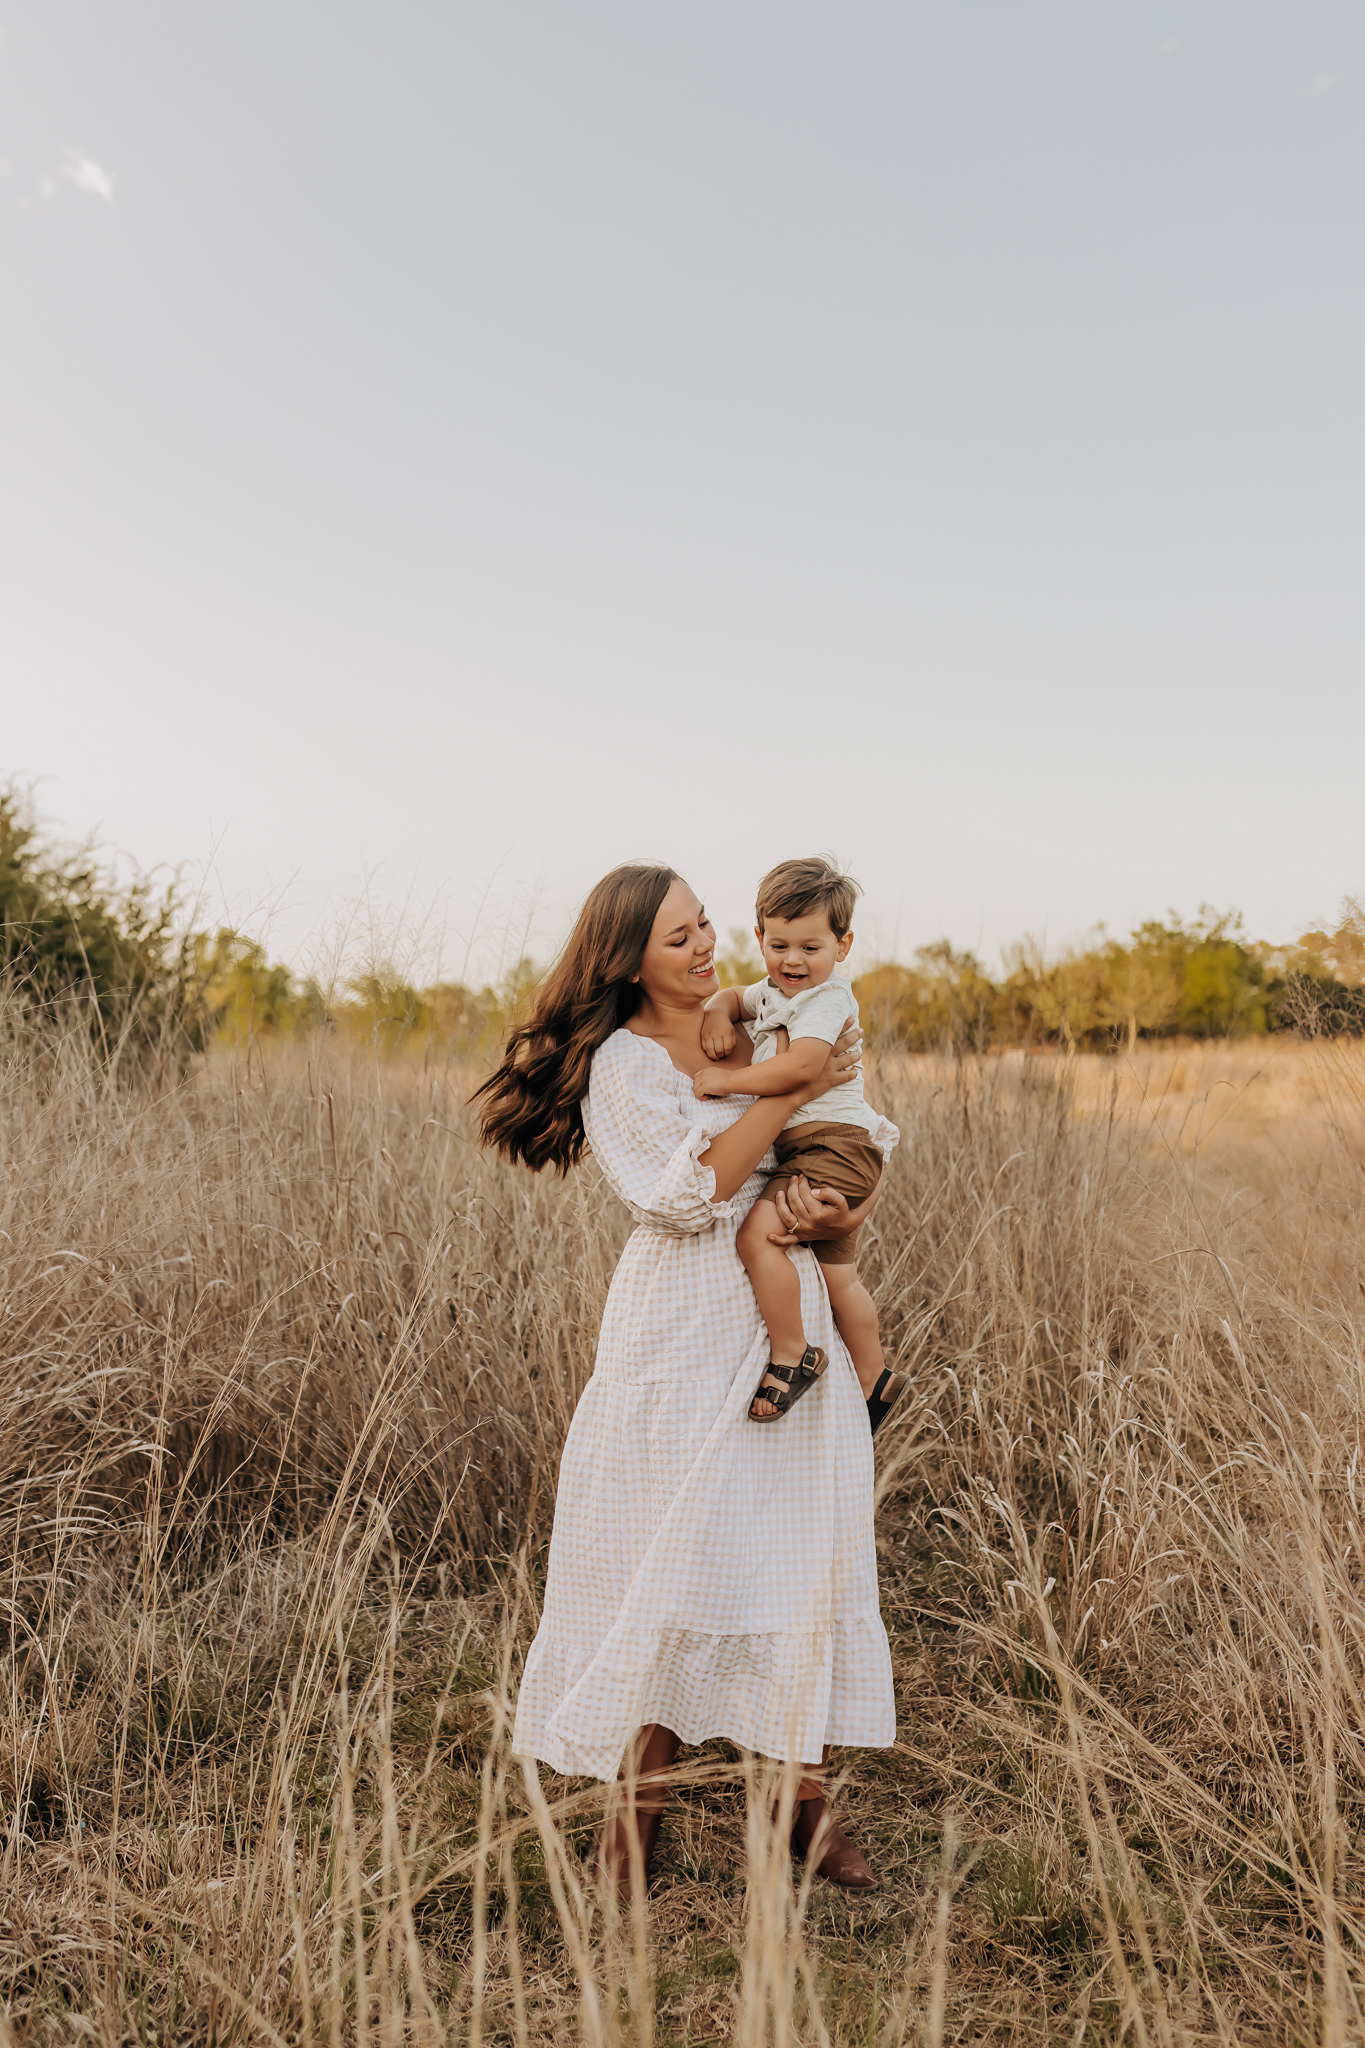 Mom and son walking through a San Antonio grassy field for a sunset photography session.